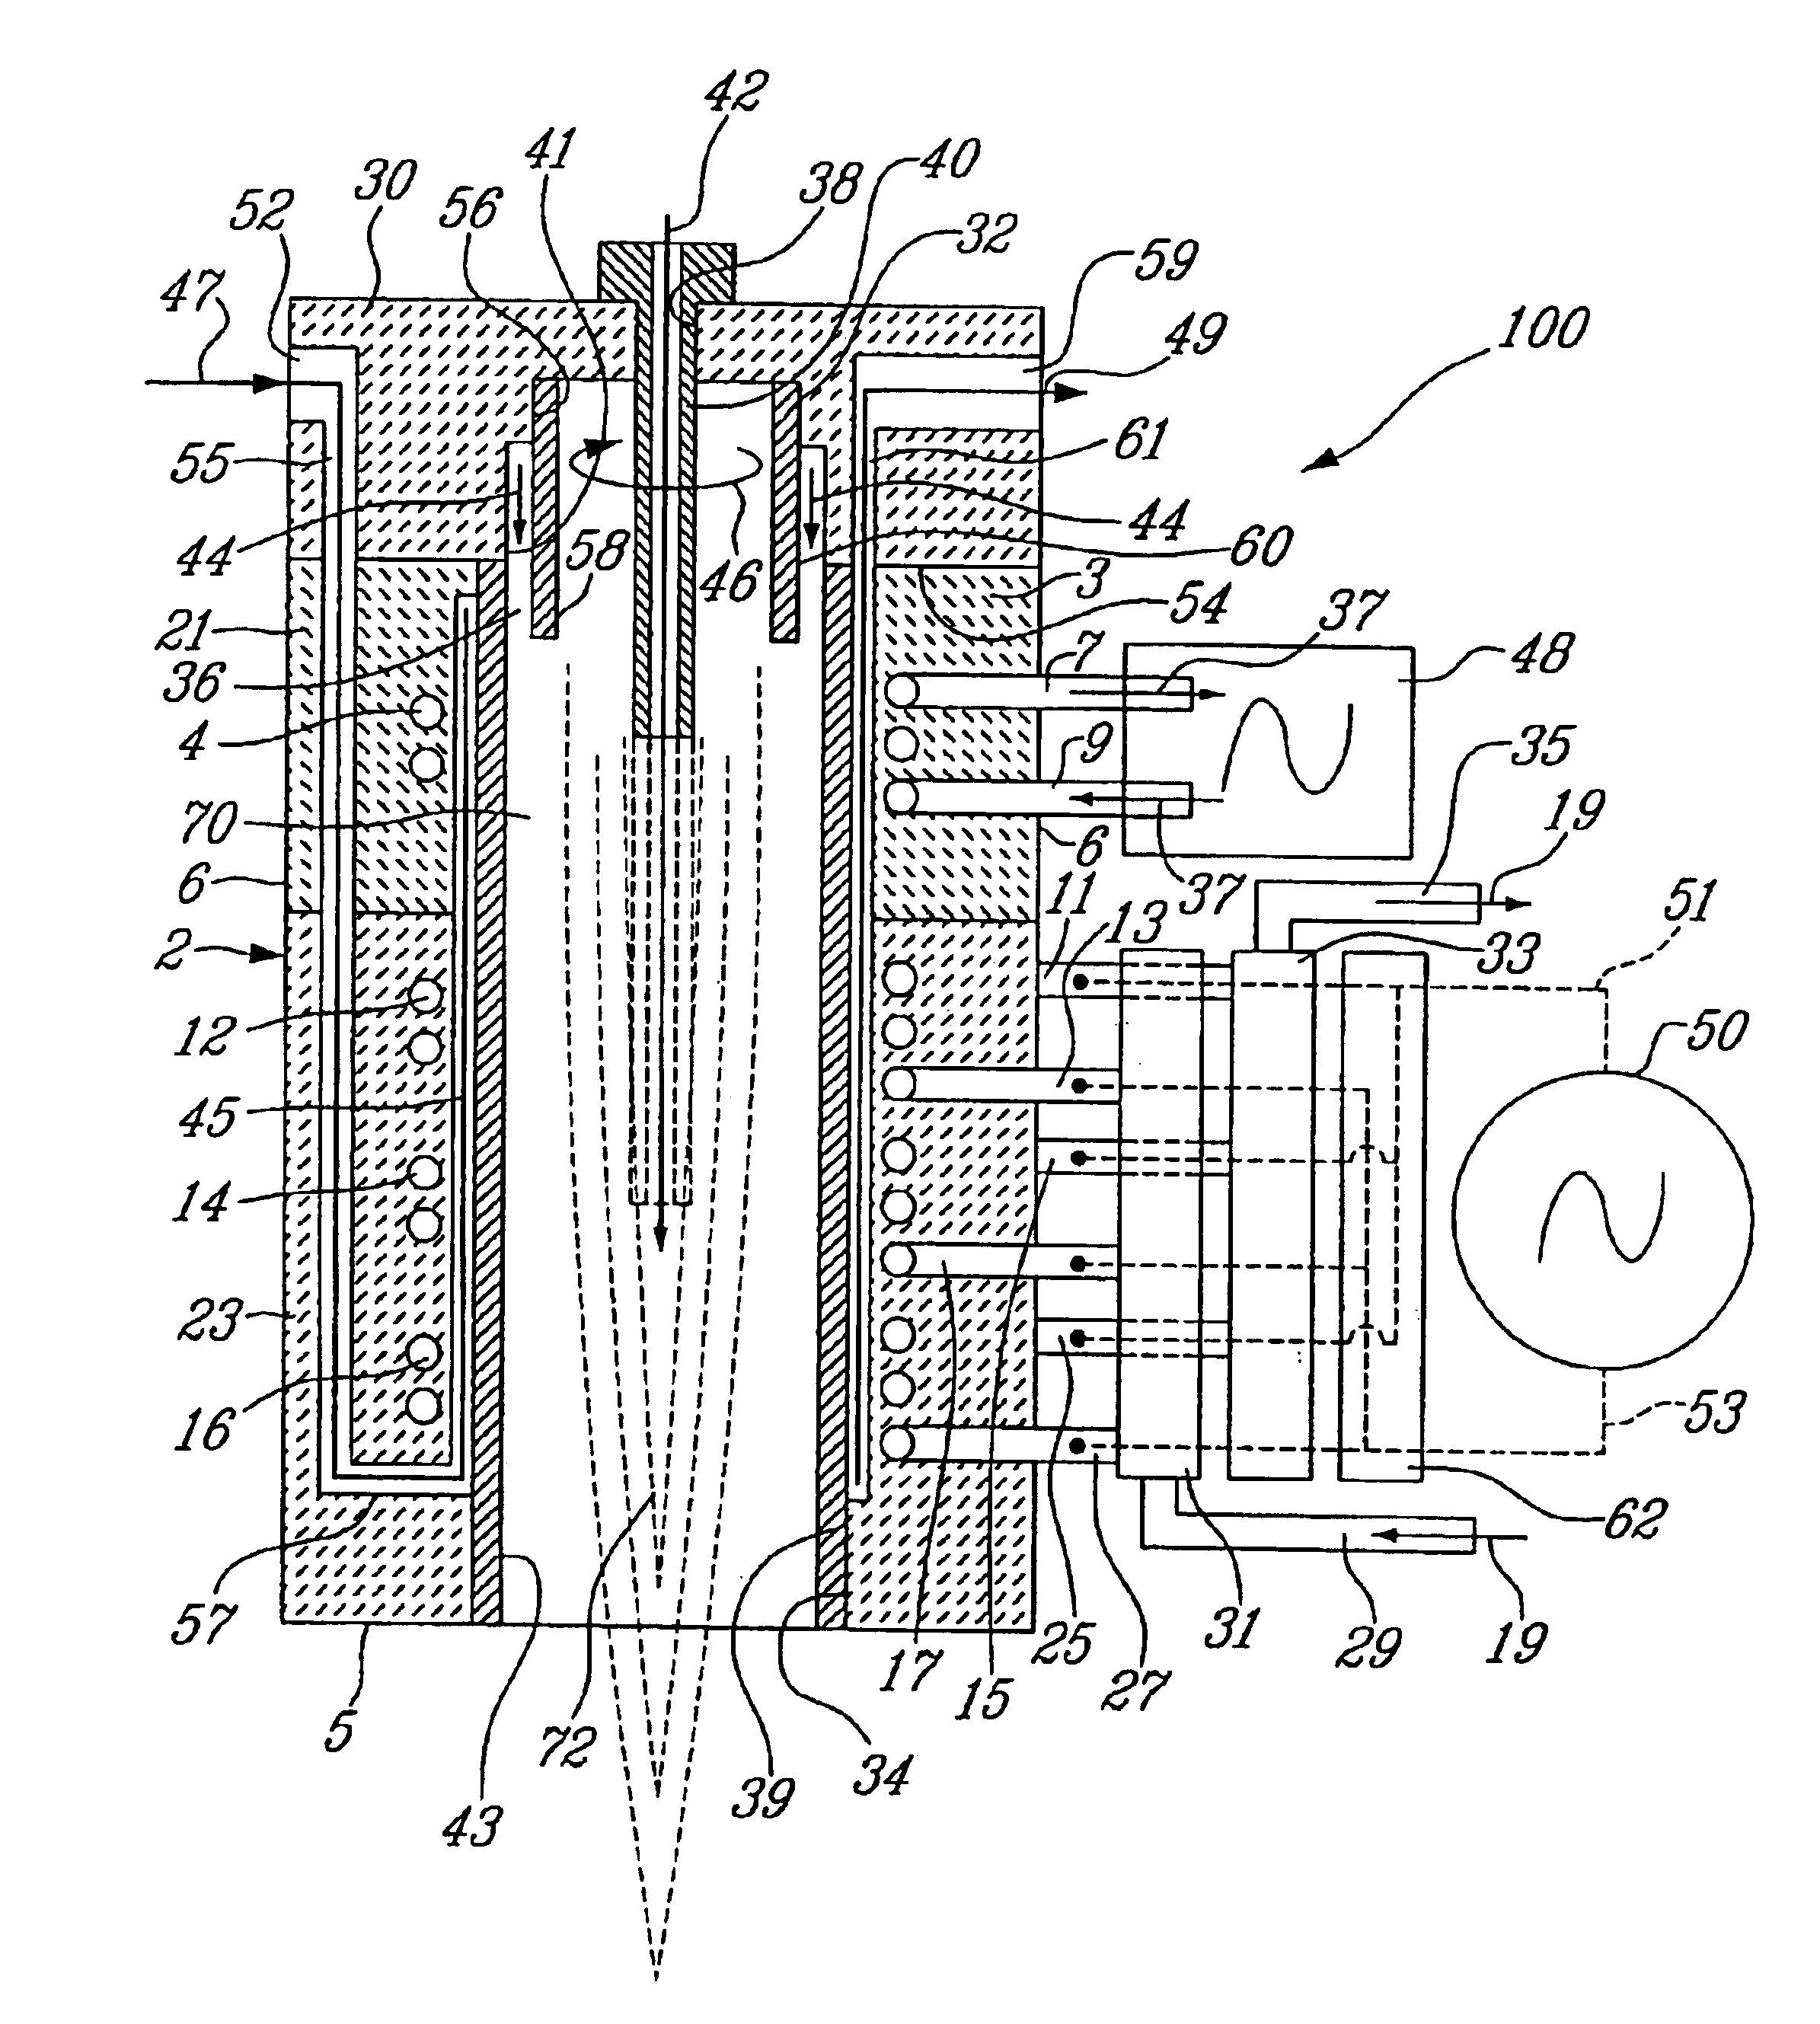 Multi-coil induction plasma torch for solid state power supply